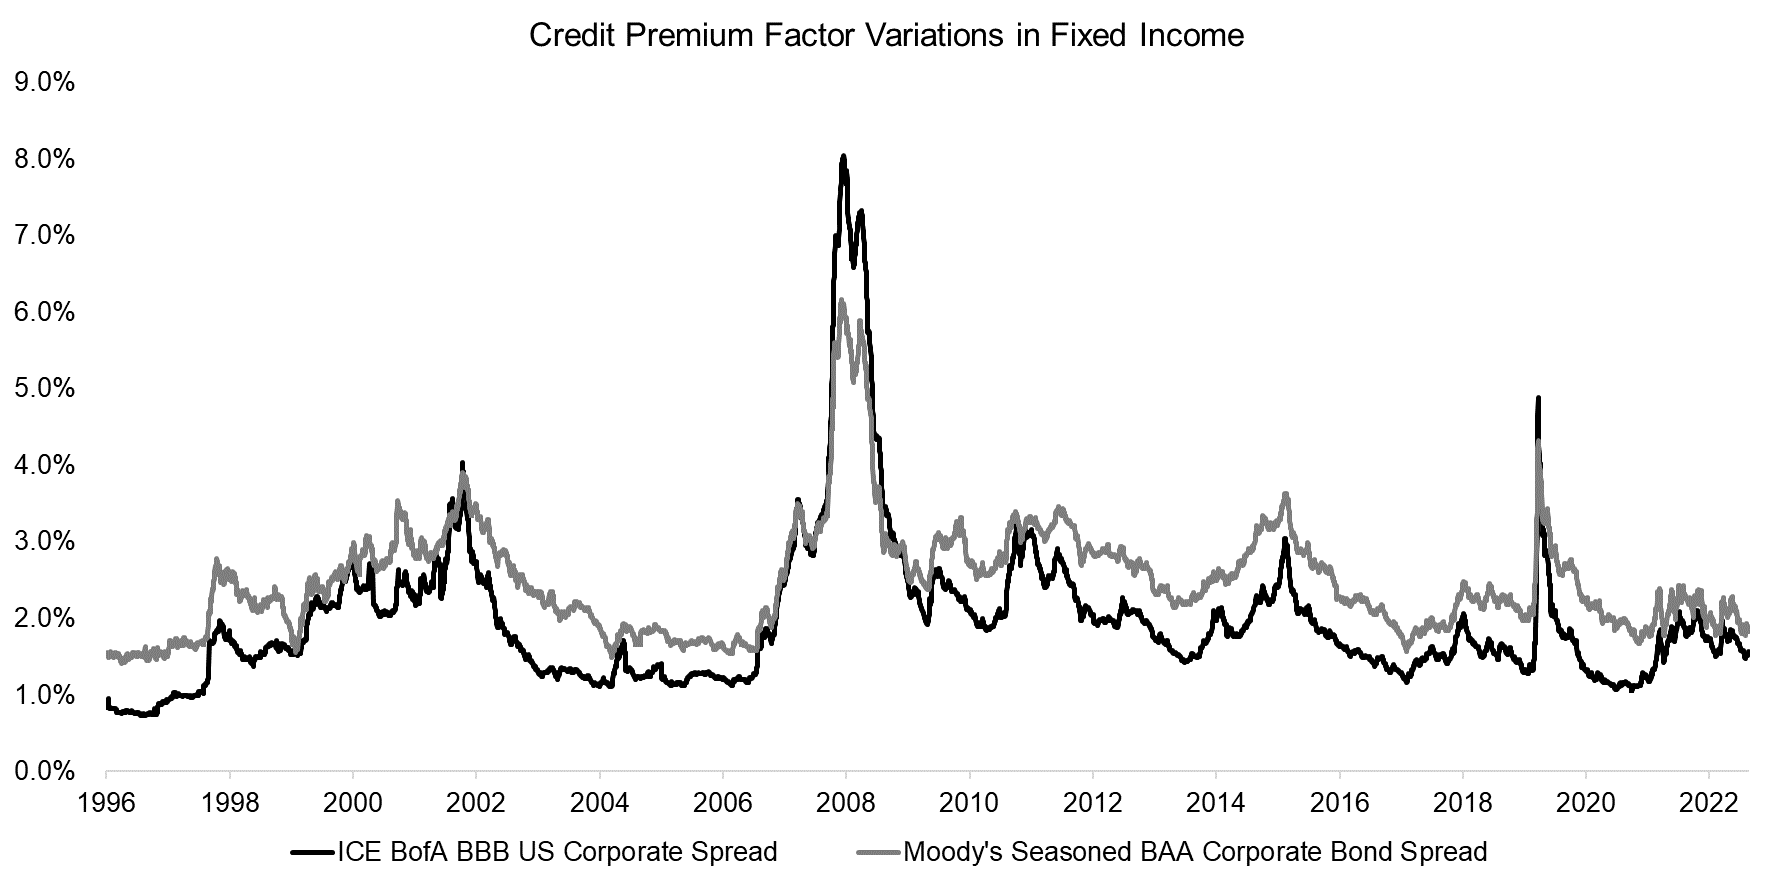 Credit Premium Factor Variations in Fixed Income